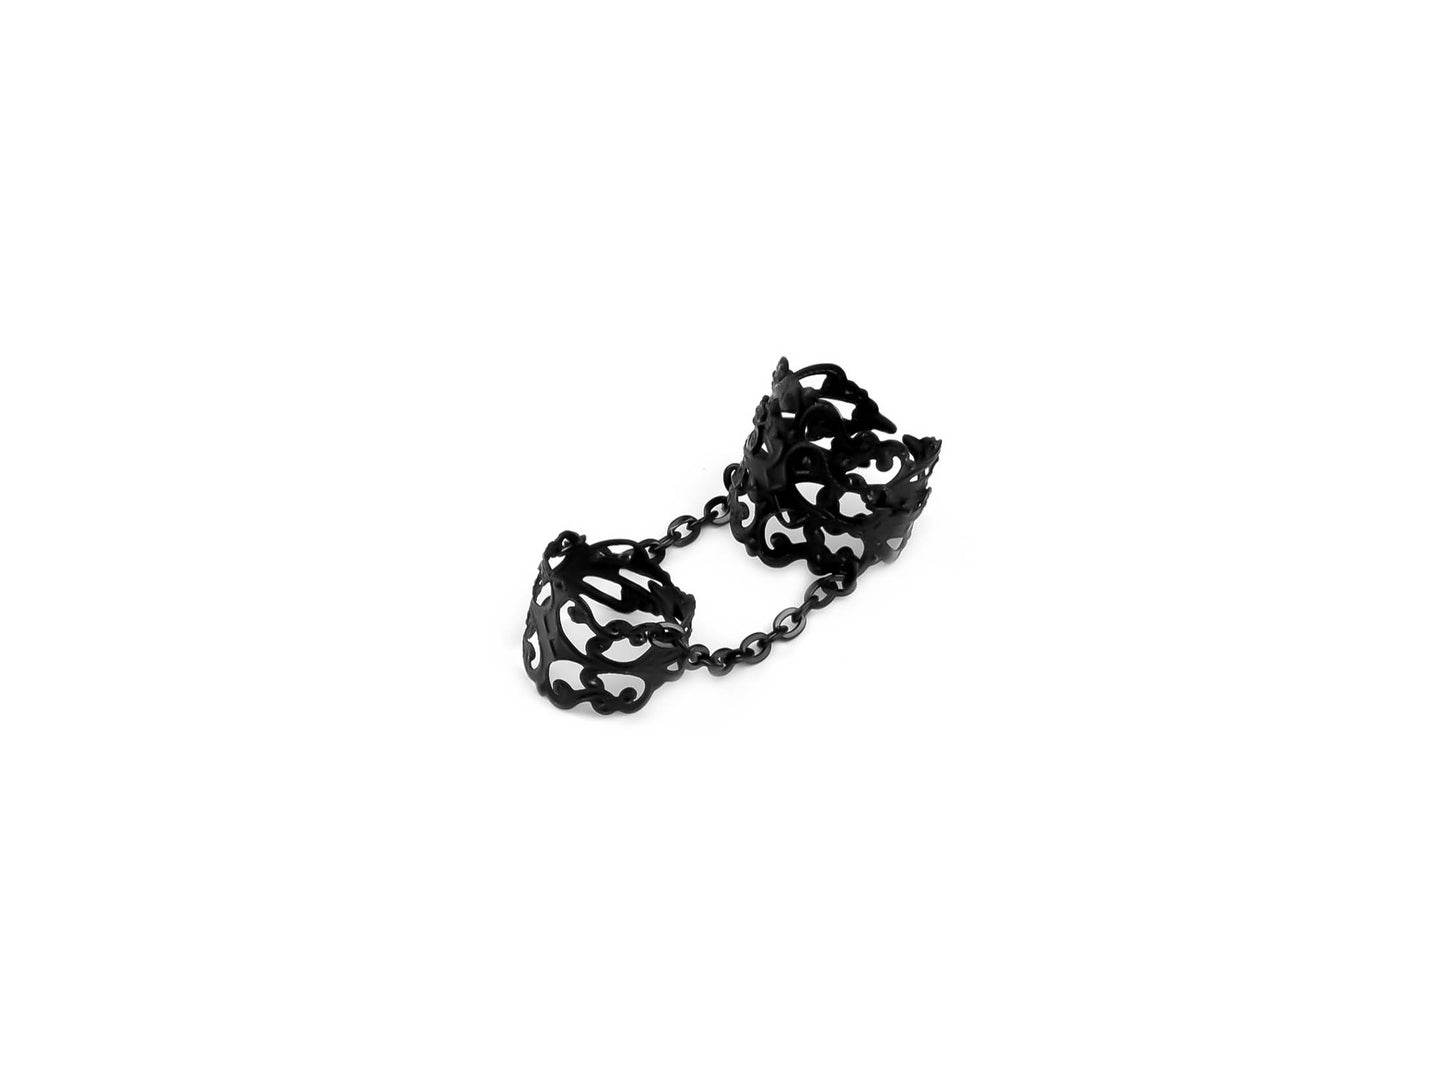 Black and Silver Double Filigree Ring LAFAYETTE